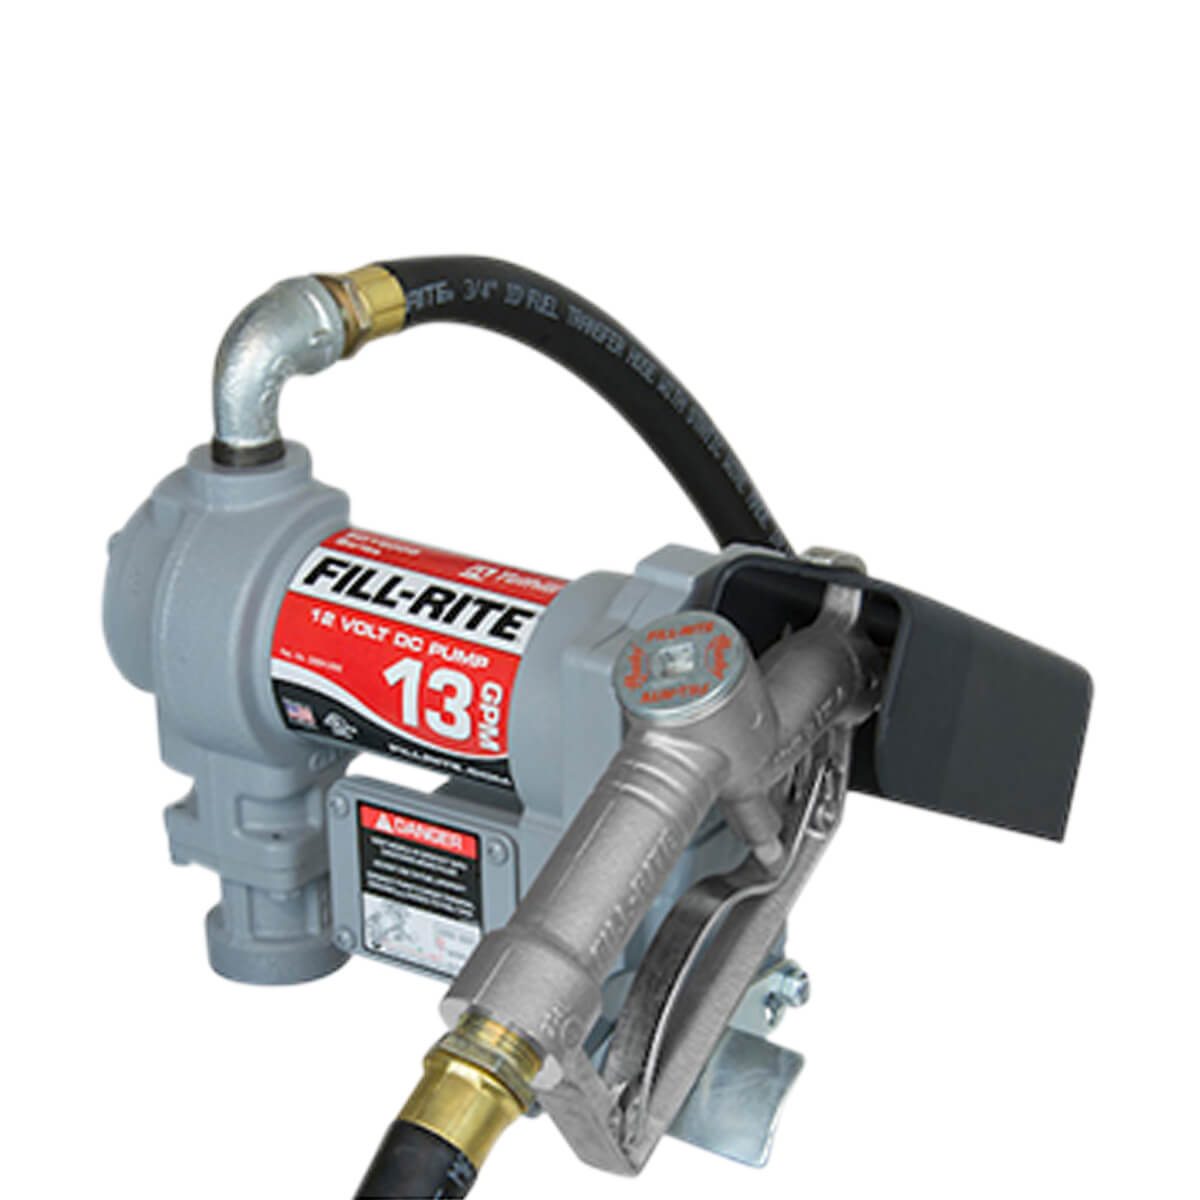 Fill-Rite SD1202G 12V Fuel Pump with Hose and Manual Nozzle